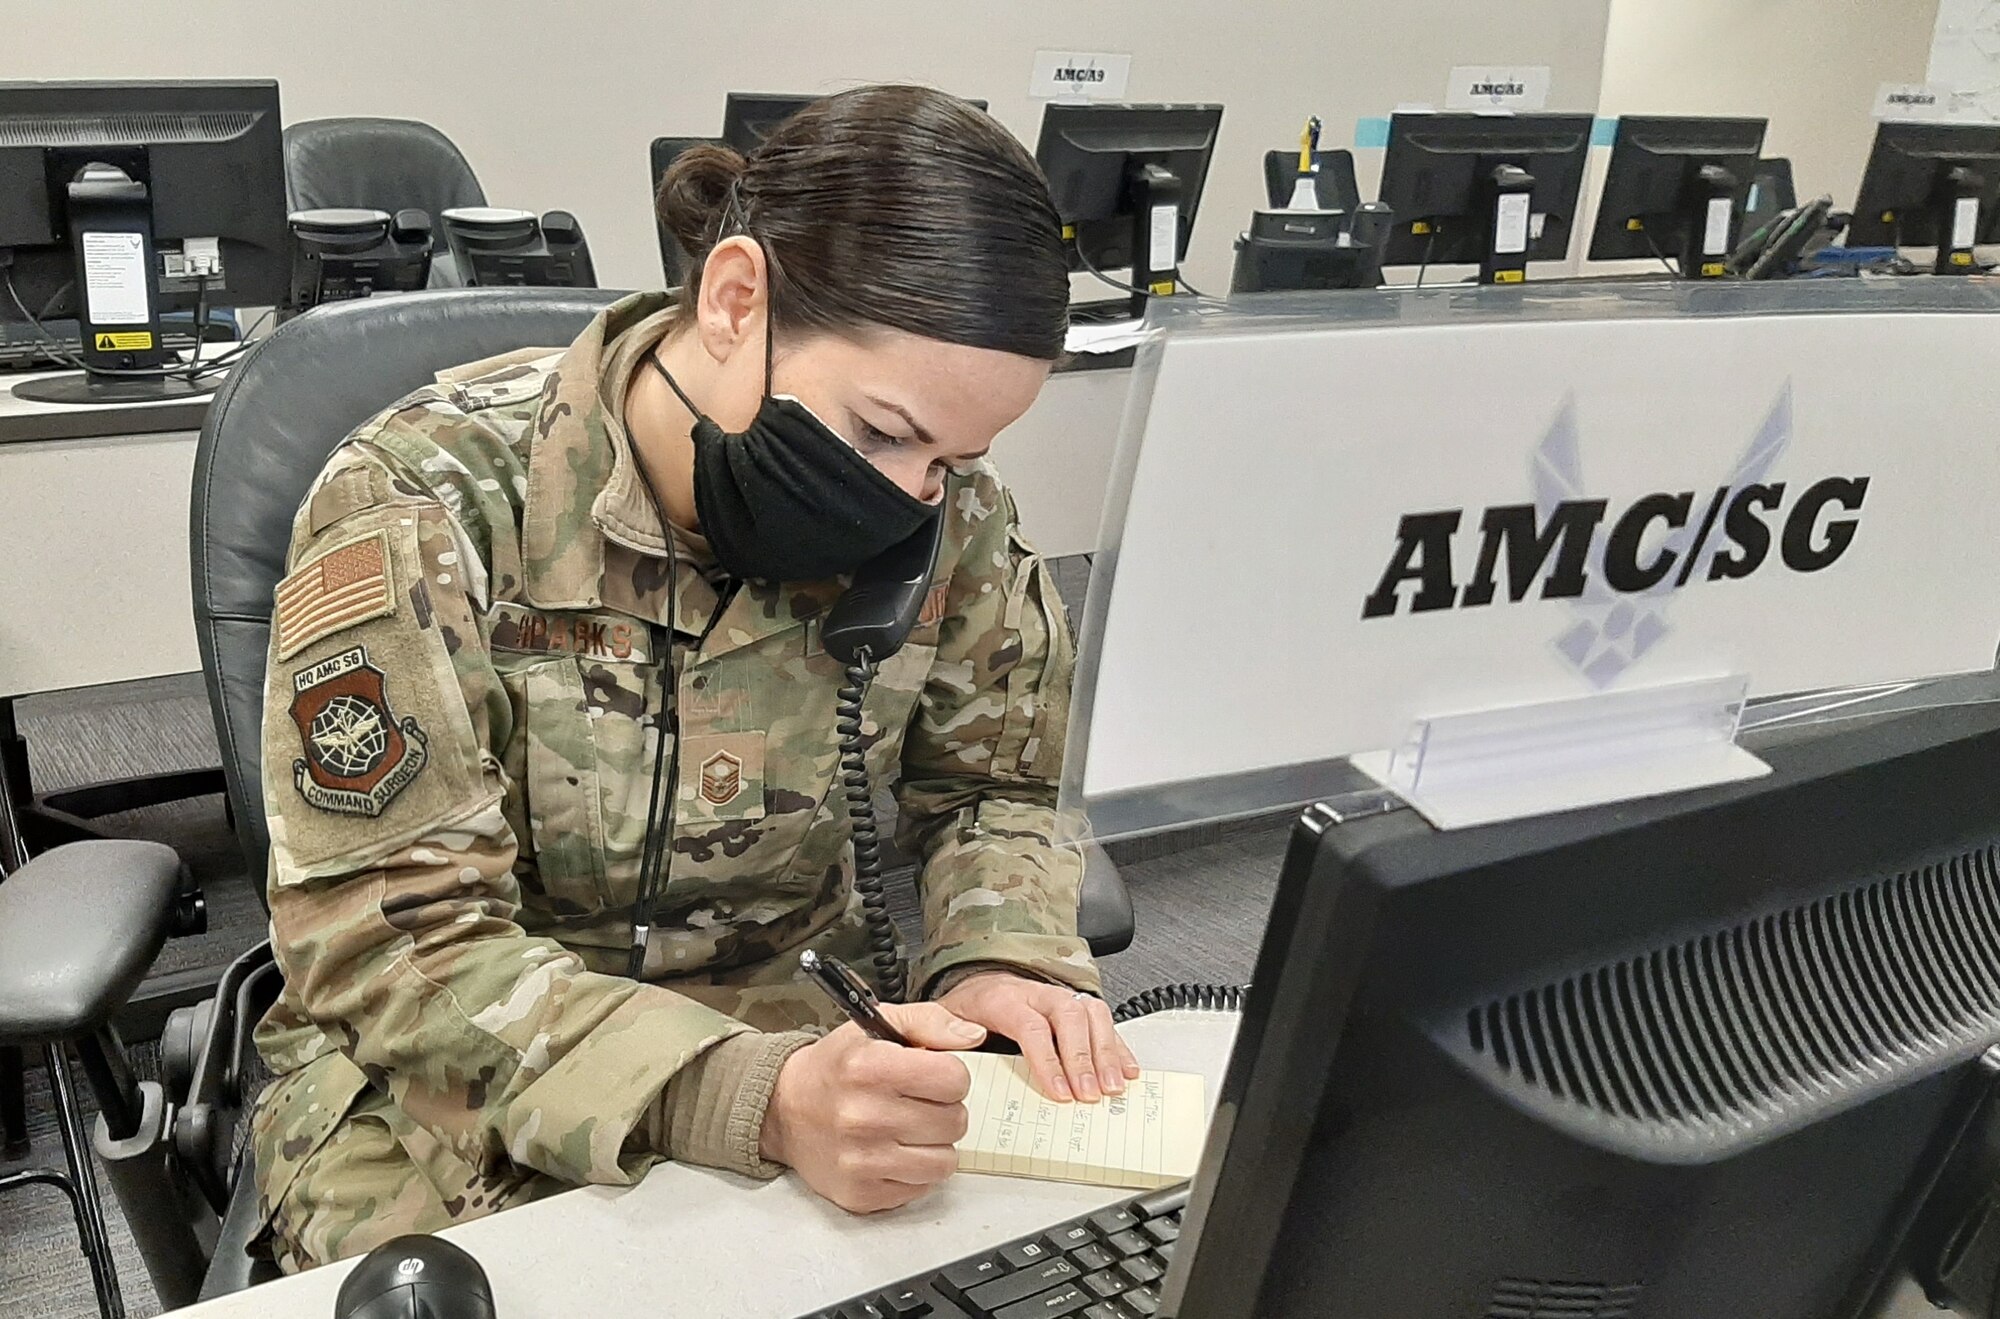 Master Sgt. Melissa Sparks, Air Mobility Command Commander’s Battle Staff SG or medical representative, coordinates daily operations from the CBS in support of the fight against the COVID-19 pandemic at Scott Air Force Base, Illinois, April 15, 2020. Since its activation March 4, 2020, the AMC CBS has served as a single, 24/7 cell of experts to ensure uninterrupted rapid global mobility amidst the COVID-19 pandemic, producing more than 40 Battle Staff Directives to guide Airmen on everything from aircraft decontamination to patient movement to timely reporting of COVID-19 cases at AMC installations. (U.S. Air Force photo by Col. Damien Pickart)